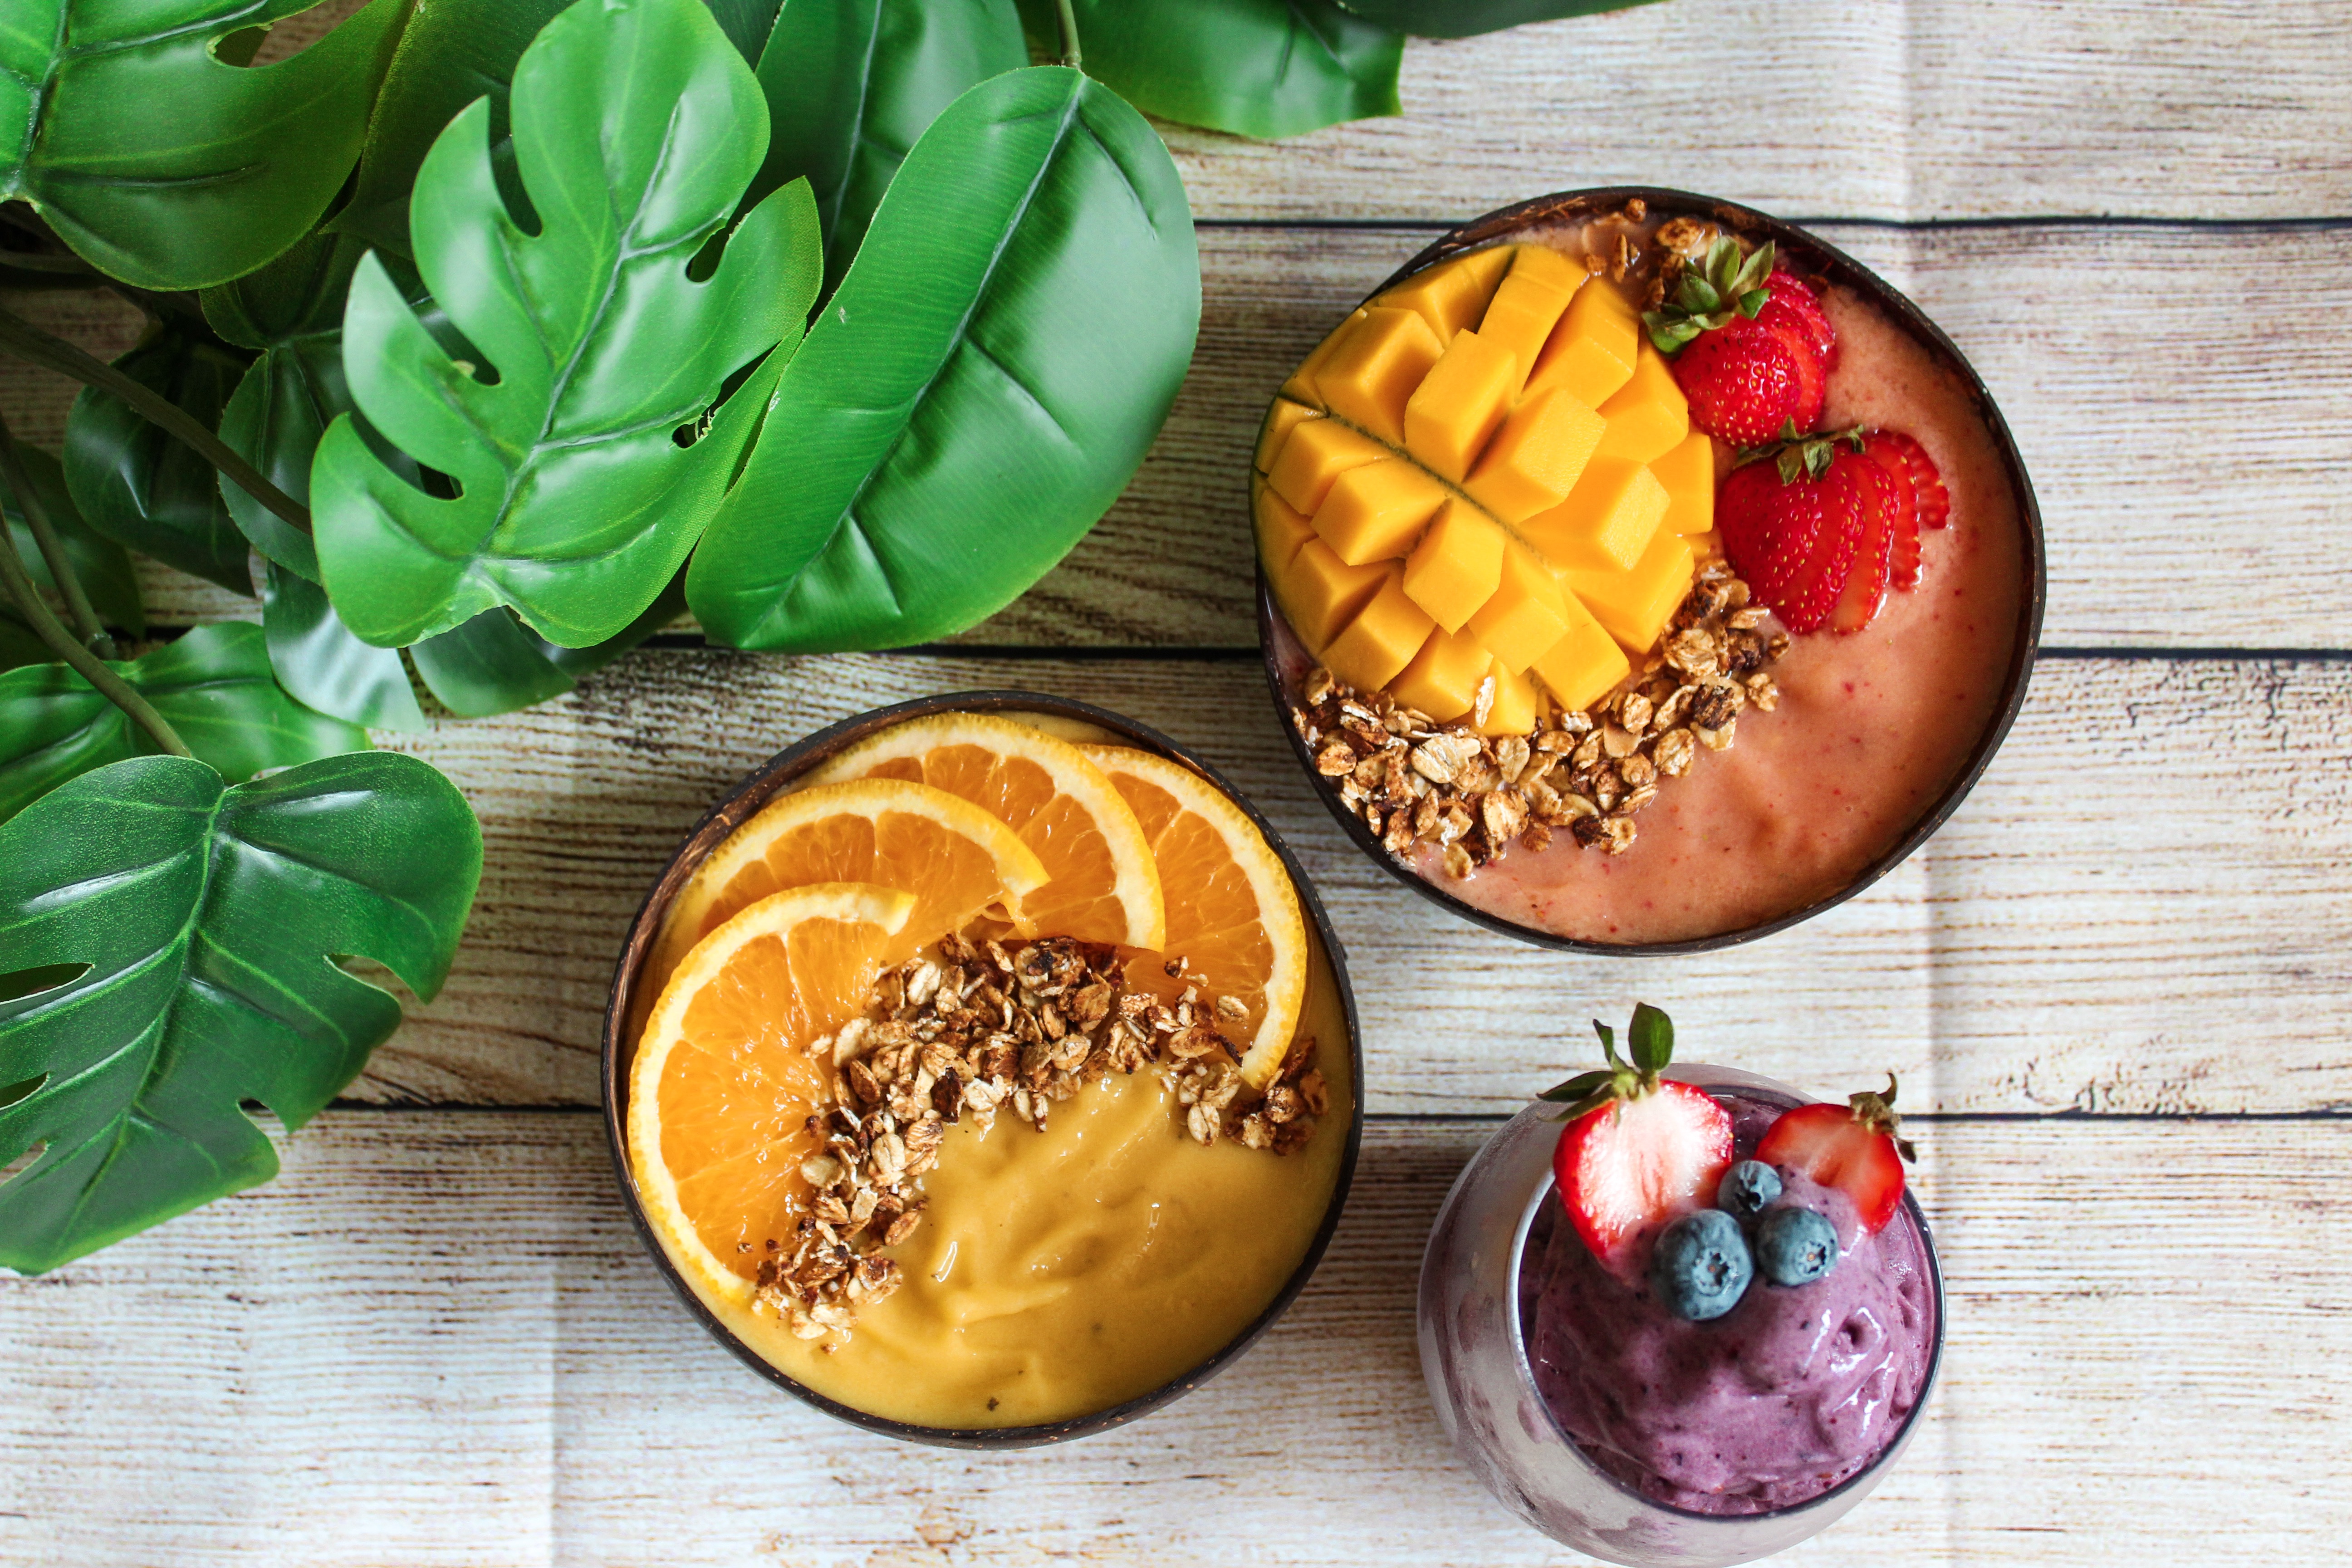 Plant-based smoothie ideas from the Wholesome Culture Cookbook